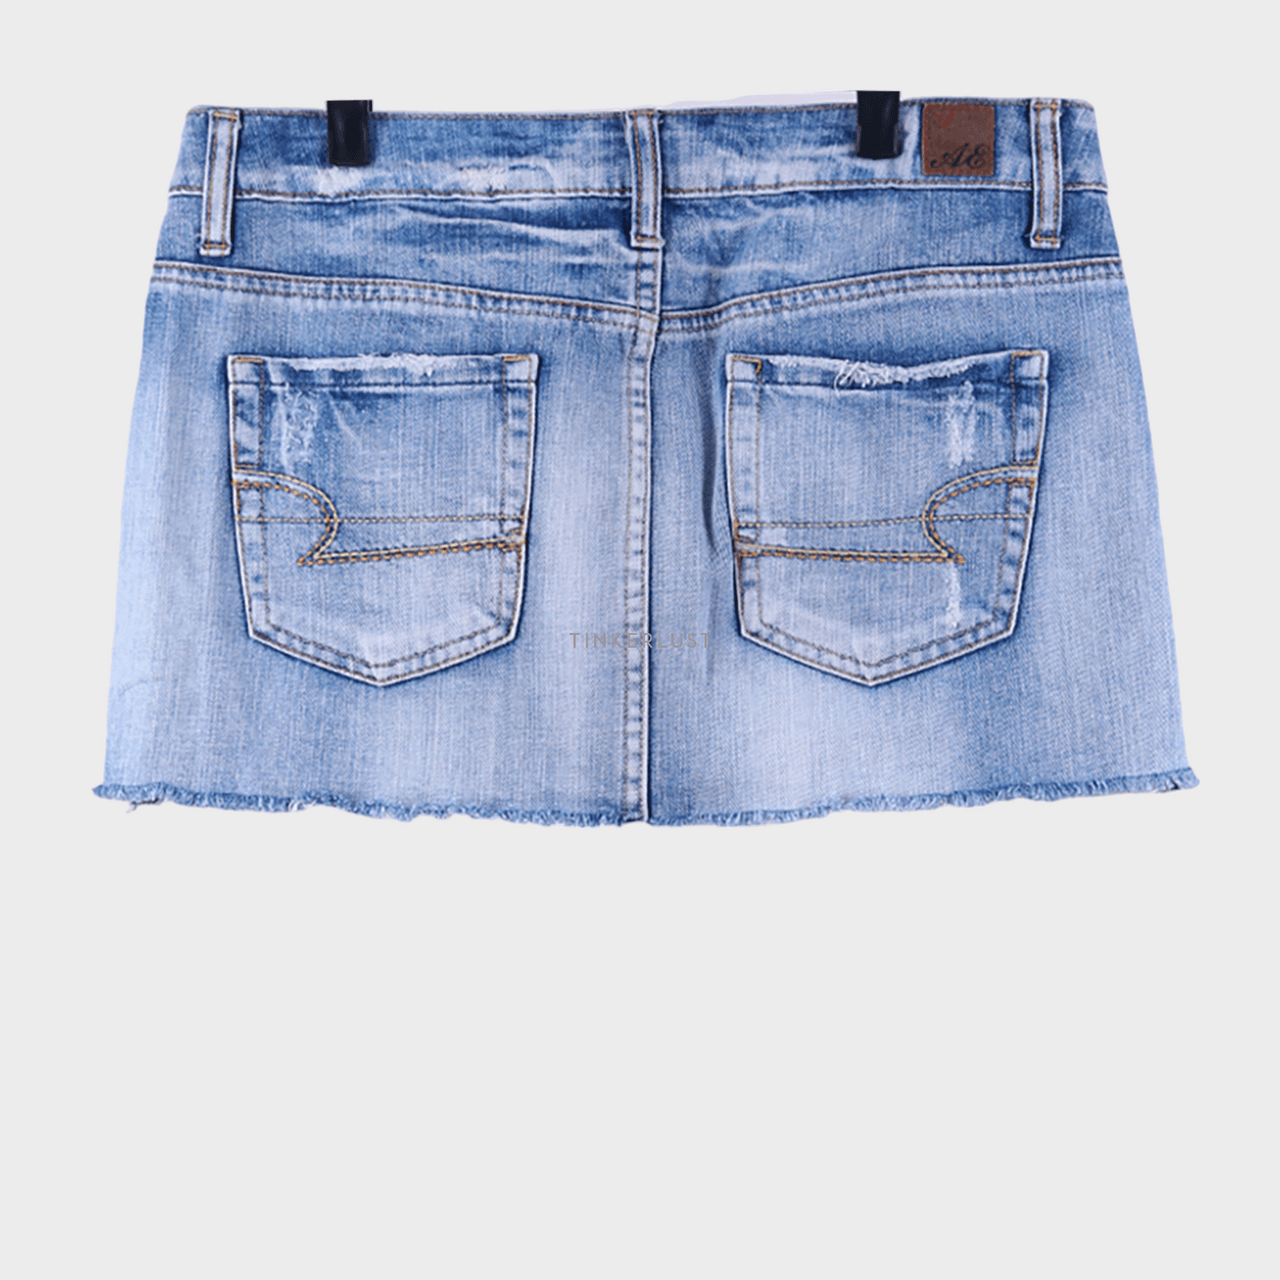 American Eagle Blue Jeans Unfinished Mini Skirt